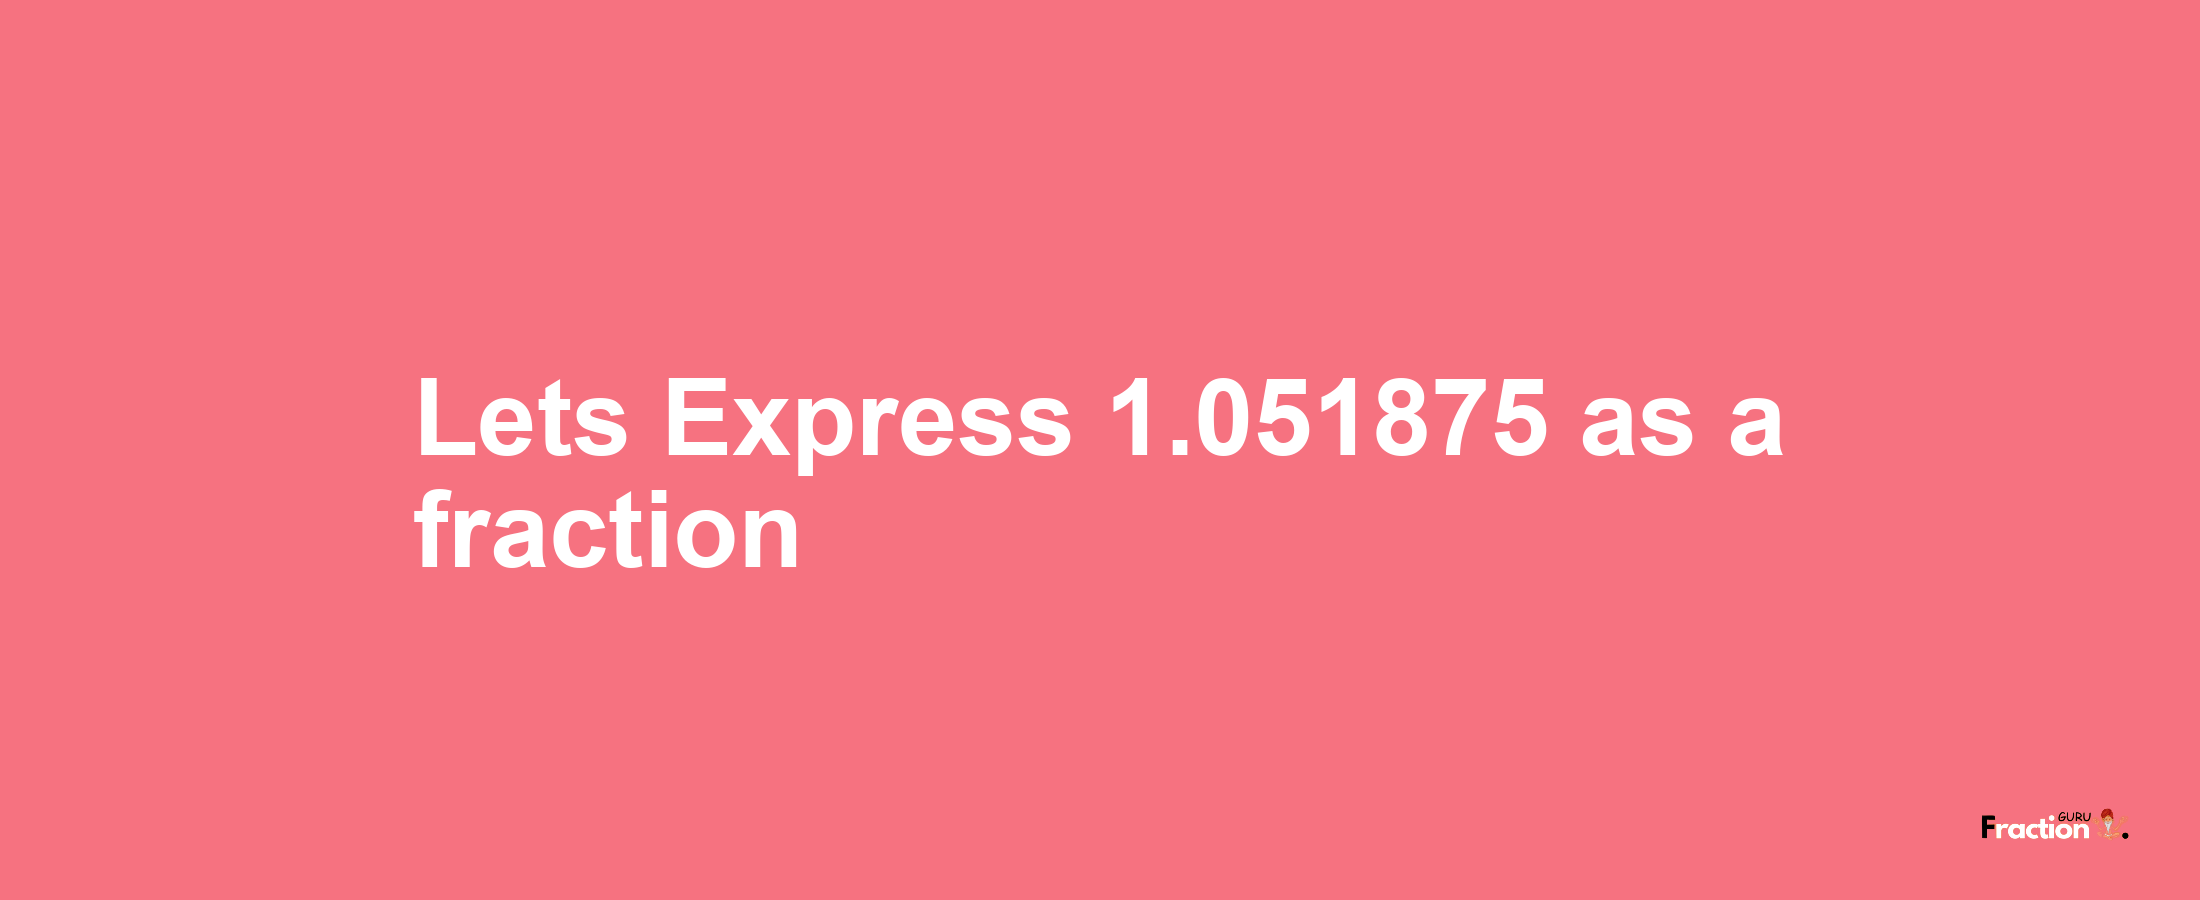 Lets Express 1.051875 as afraction